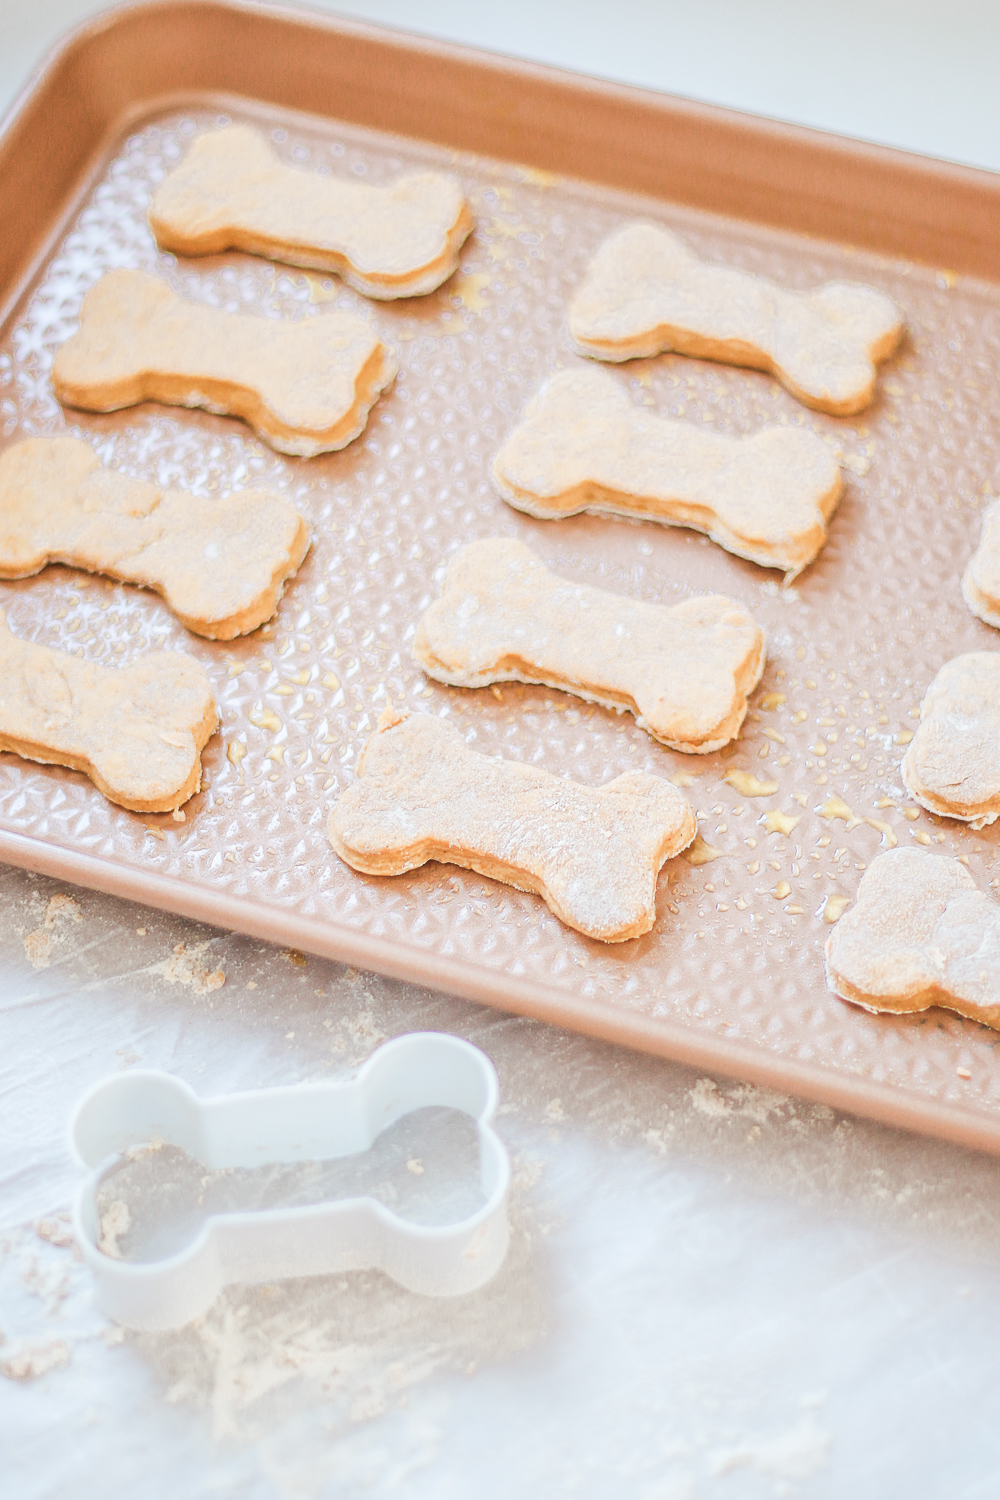 4-Ingredient Grain Free Homemade Dog Treats by southern lifestyle blogger and golden retriever dog mom Stephanie Ziajka from Diary of a Debutante, diy grain free dog treats, grain free peanut butter dog treats recipe